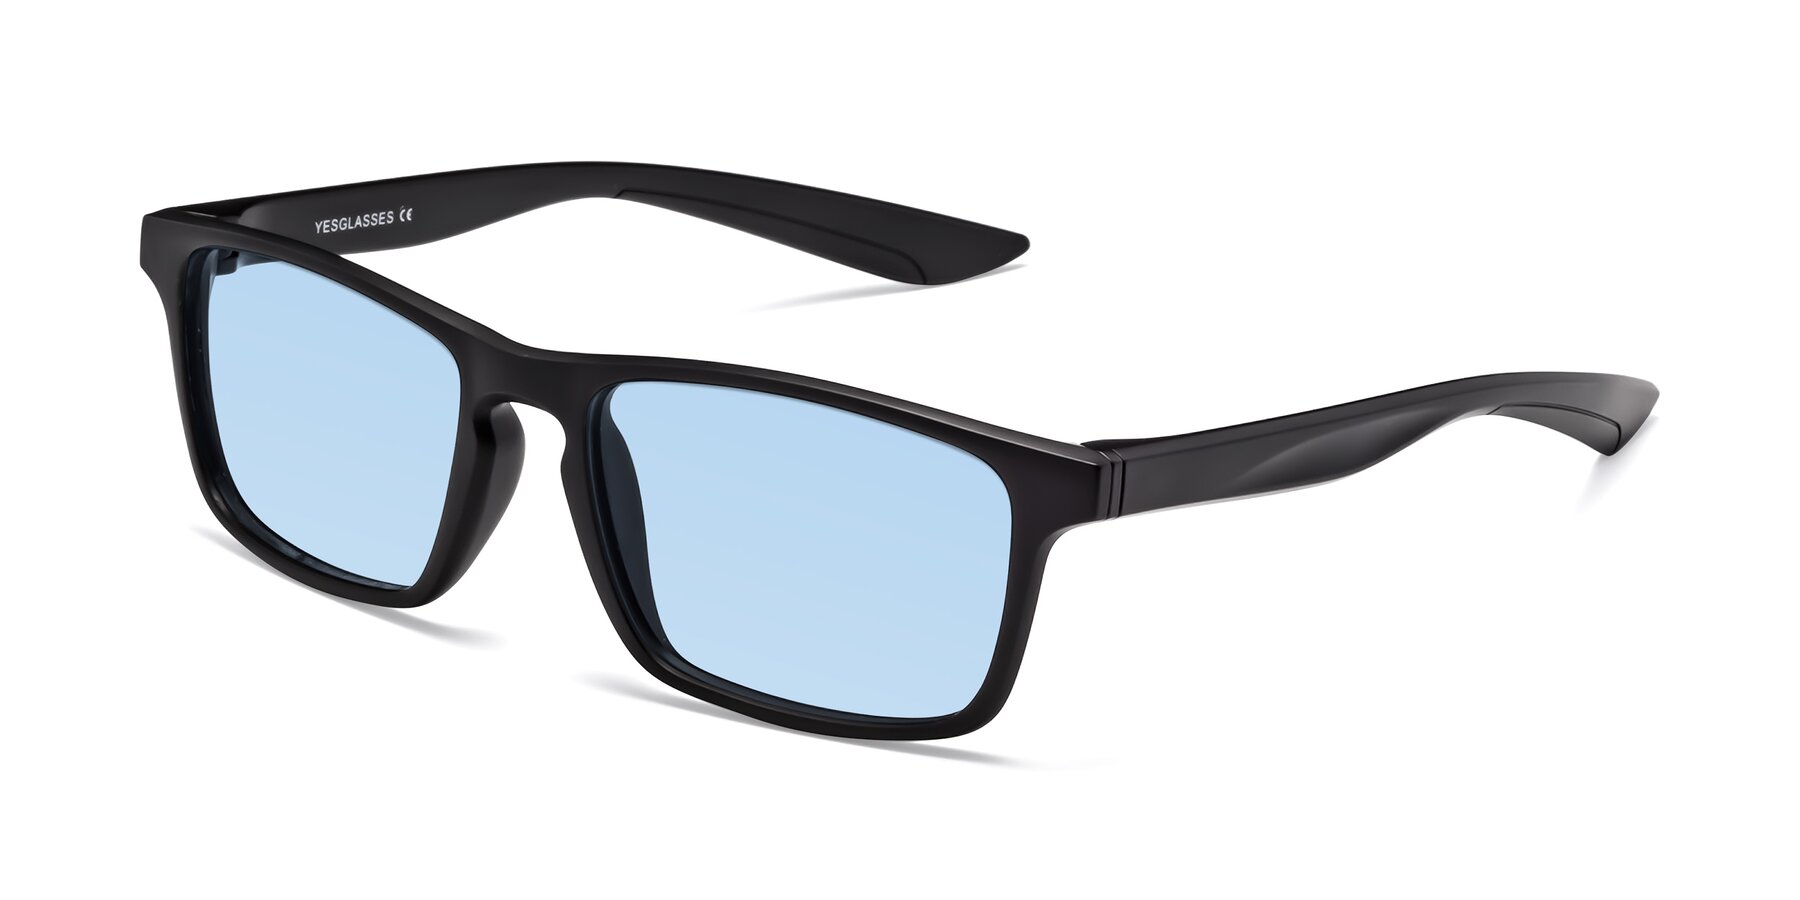 Angle of Passion in Matte Black with Light Blue Tinted Lenses